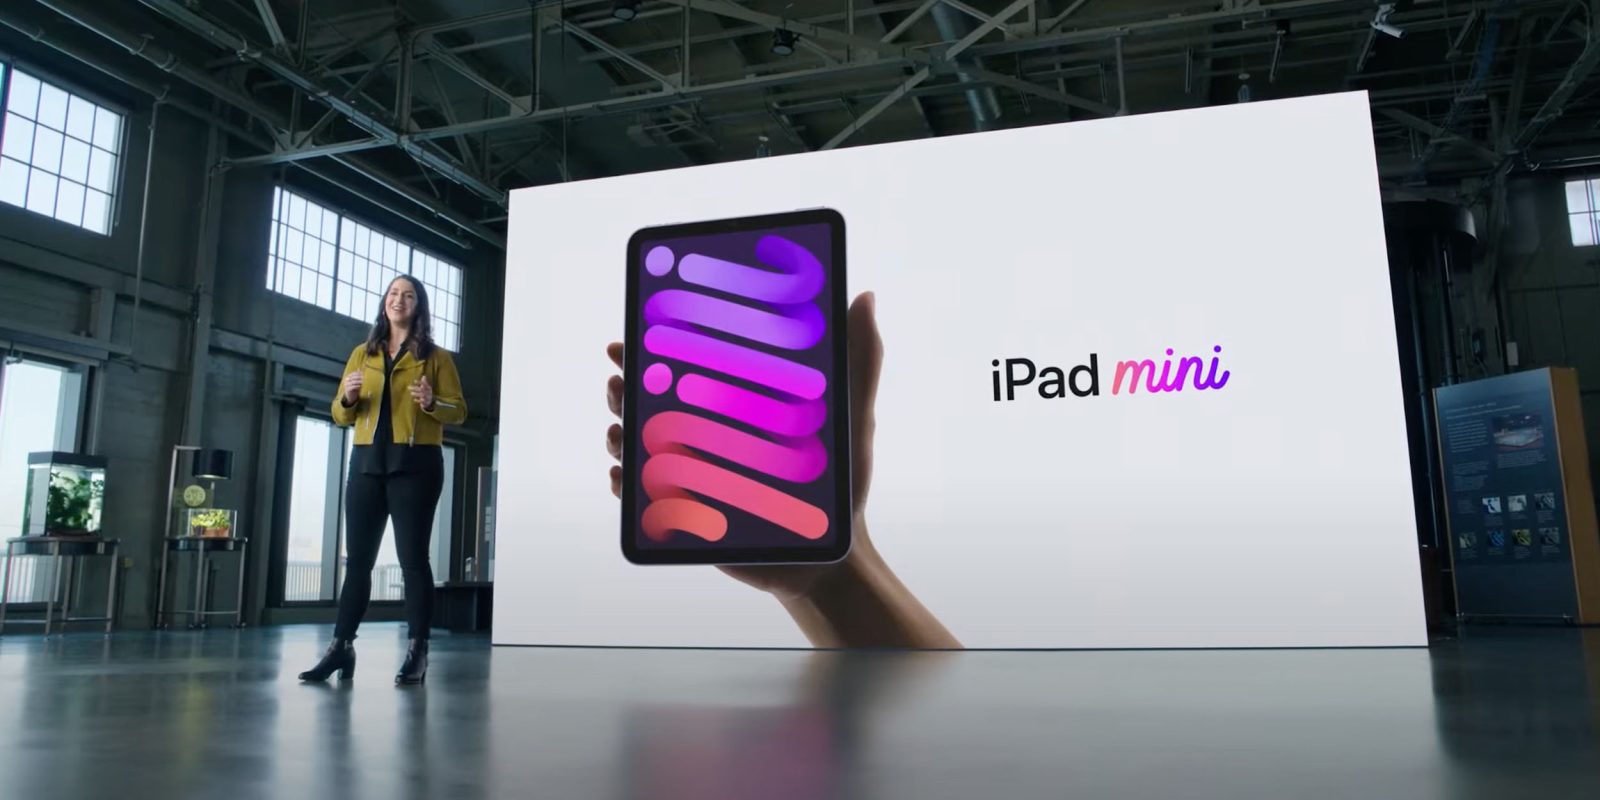 The star of yesterday's Apple event was the new iPad mini